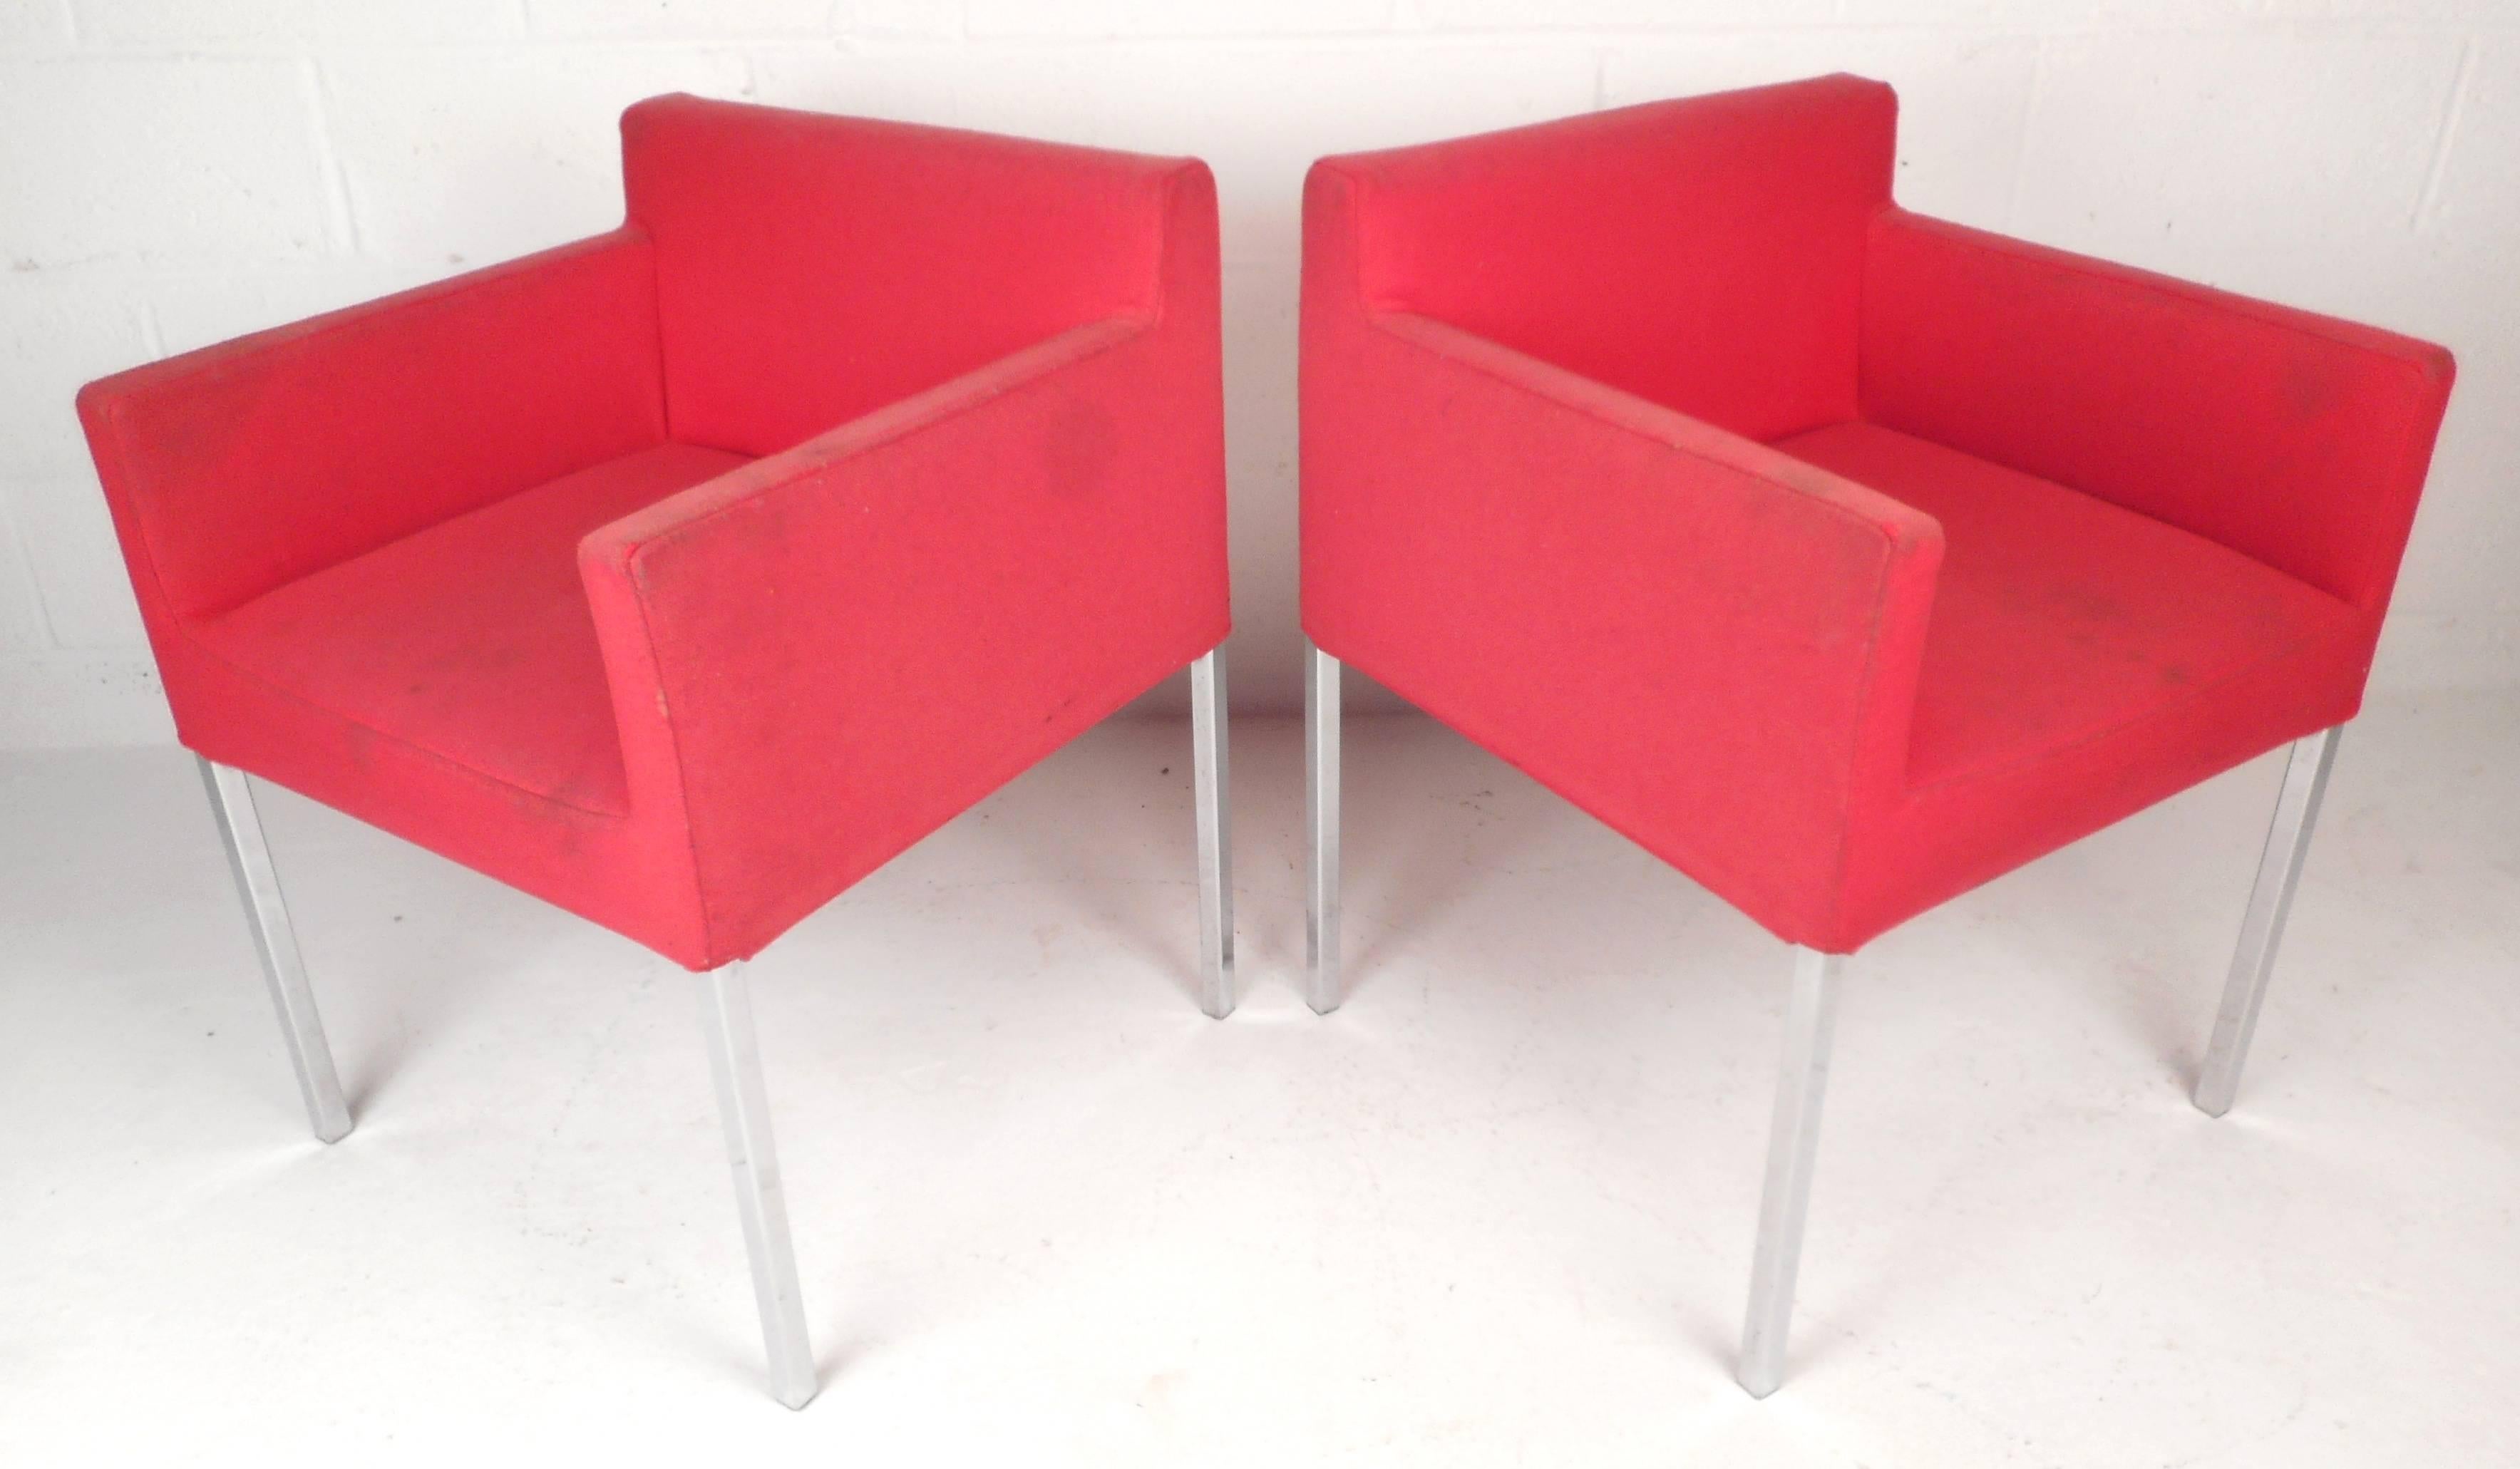 This lovely pair of Mid-Century Modern club chairs feature comfortable vintage upholstery and a handle in the back for convenience. The thick chrome legs and modern design make them the perfect addition to any setting. Please confirm item location